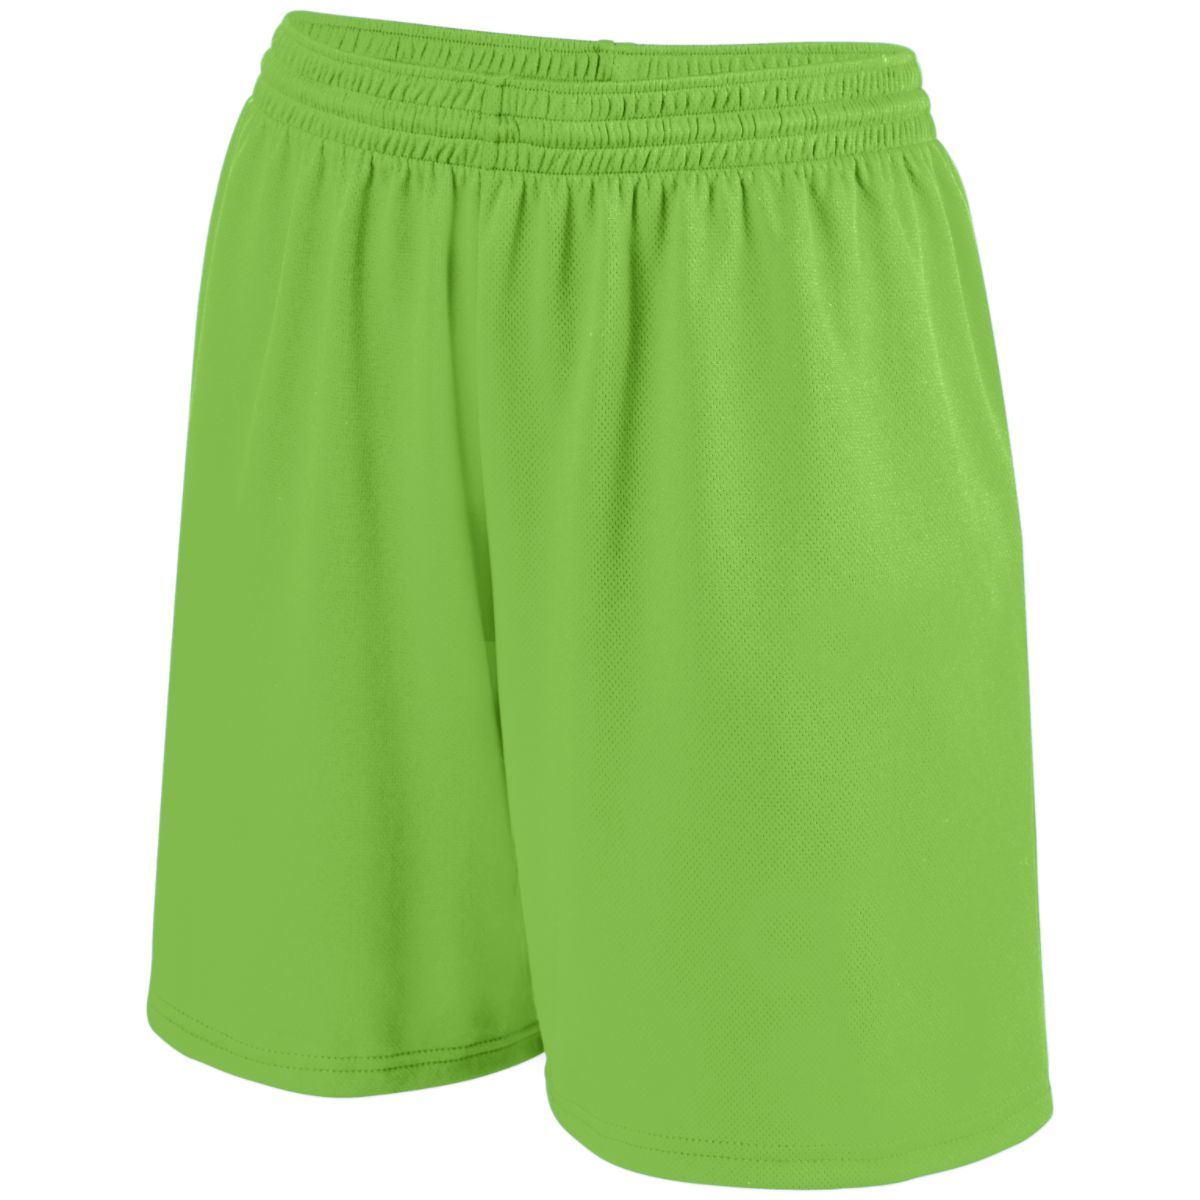 Augusta Sportswear Girls Shockwave Shorts in Lime/White  -Part of the Girls, Augusta-Products, Softball, Girls-Shorts product lines at KanaleyCreations.com